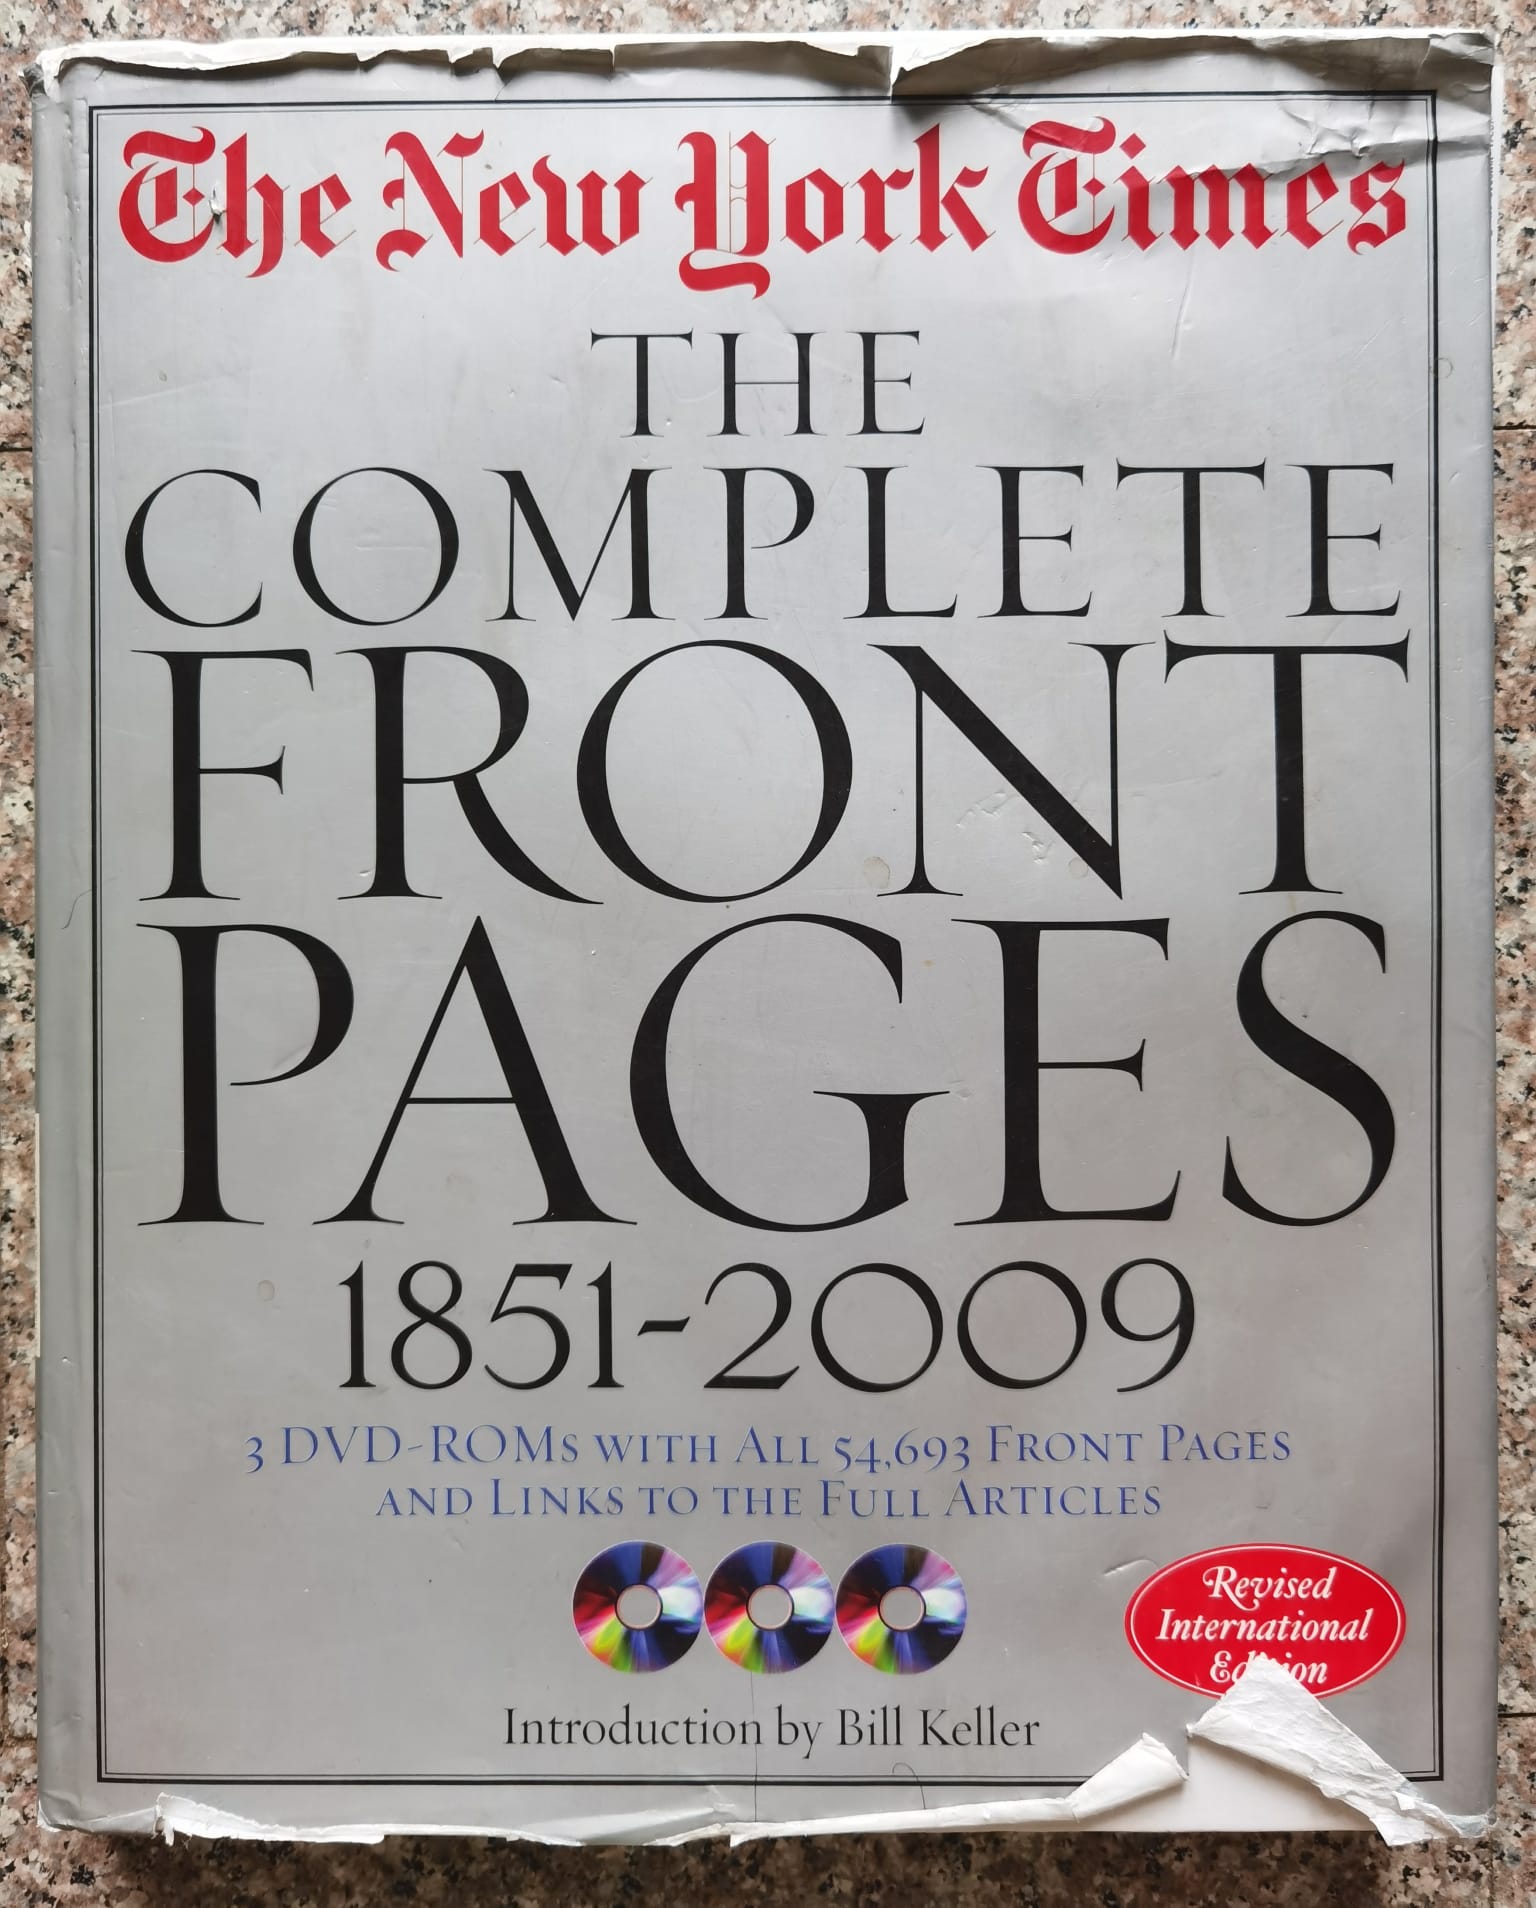 THE NEW YORK TIMES: THE COMPLETE FRONT PAGES 1851-2009                                               INTRODUCTION BY BILL KELLER                                                                         